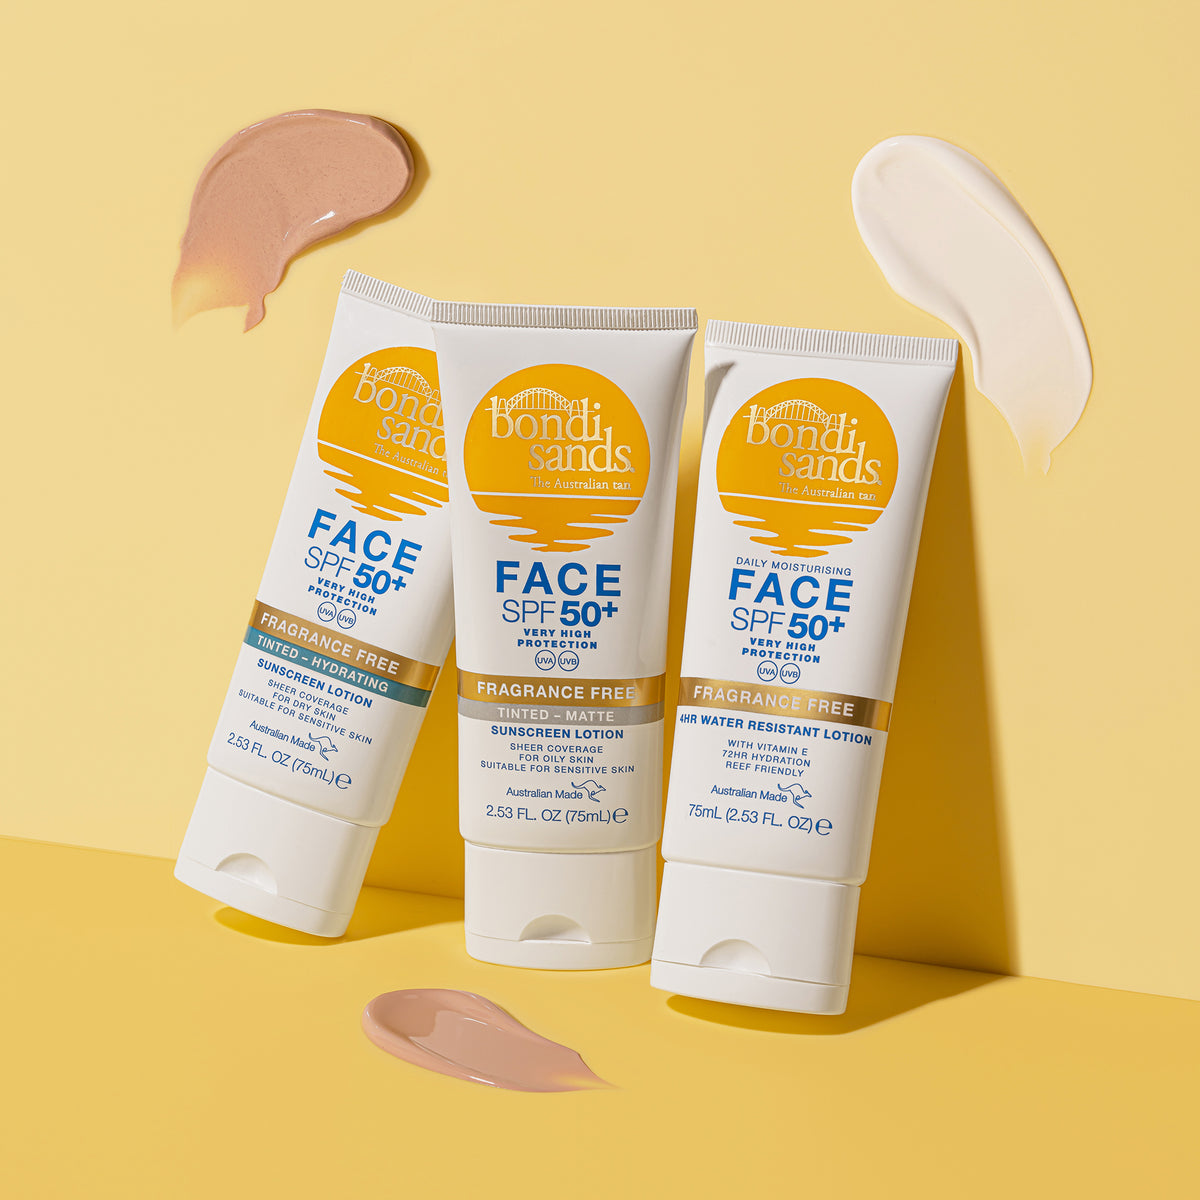 SPF 50+ Face Lotion Fragrance Free